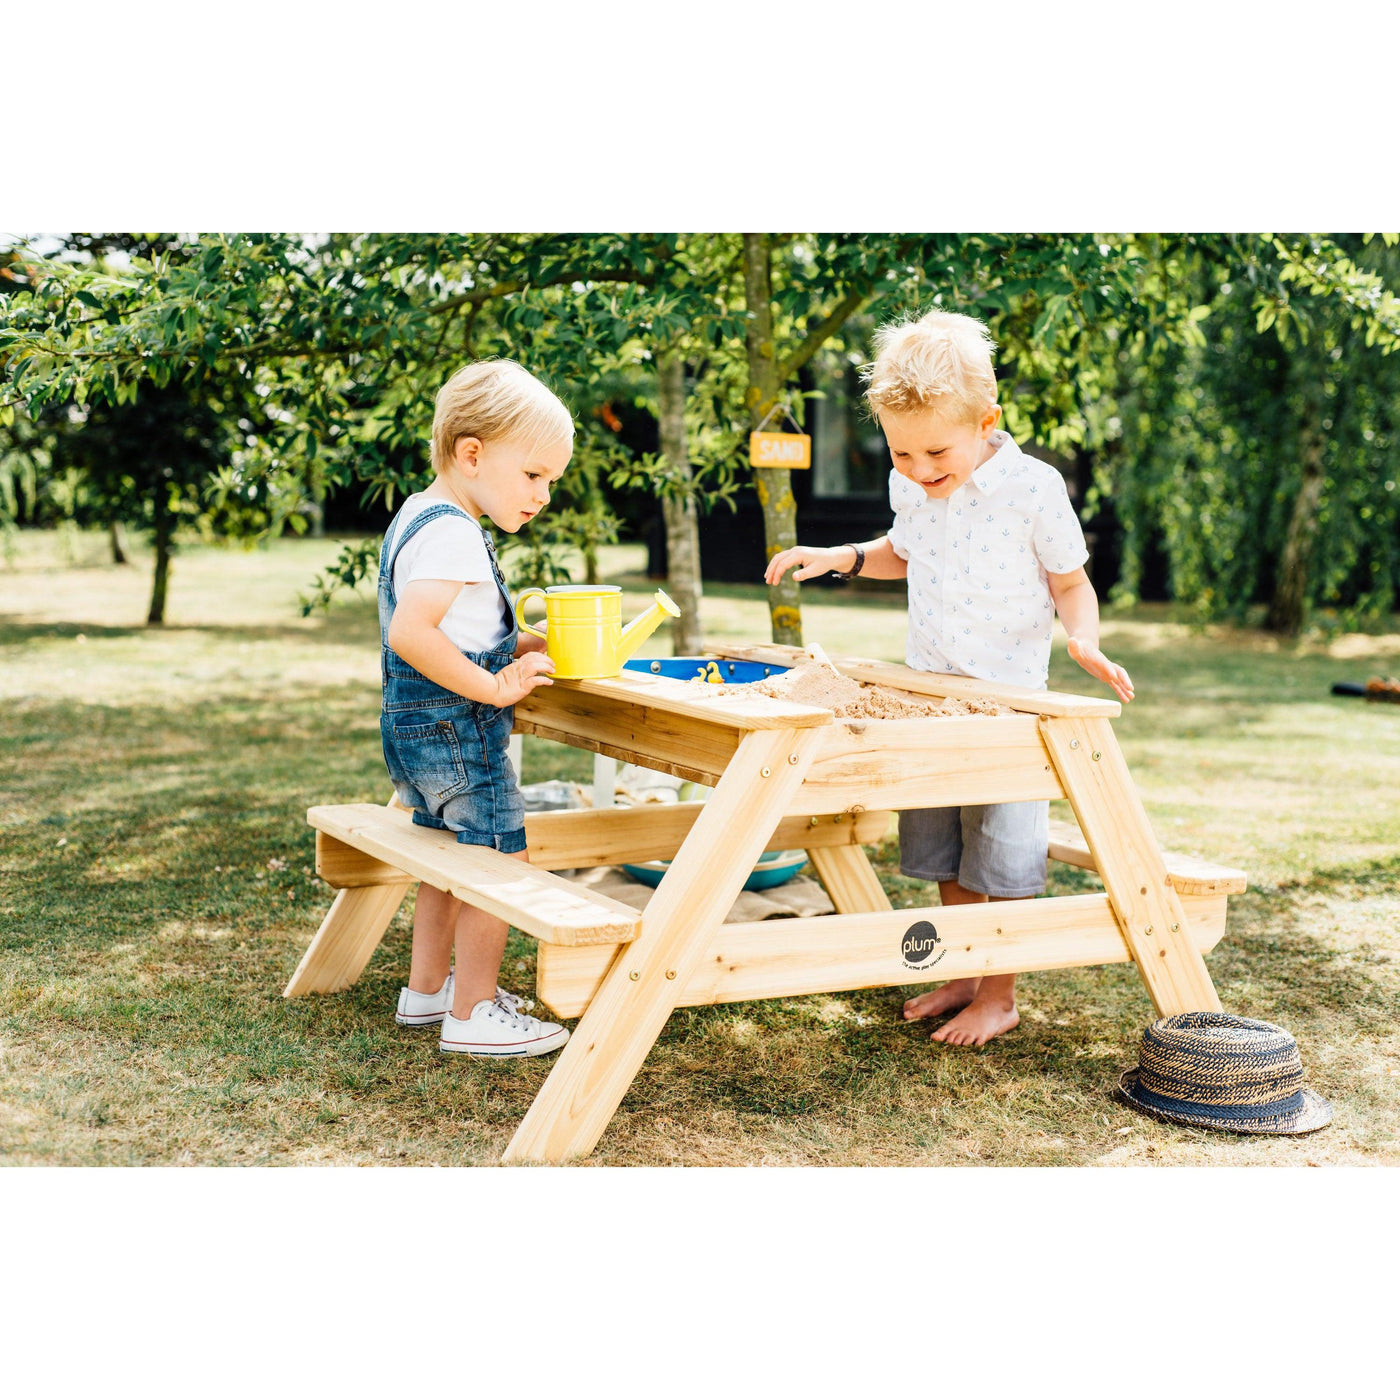 Plum Wooden Surfside Sand and Water Table - Natural